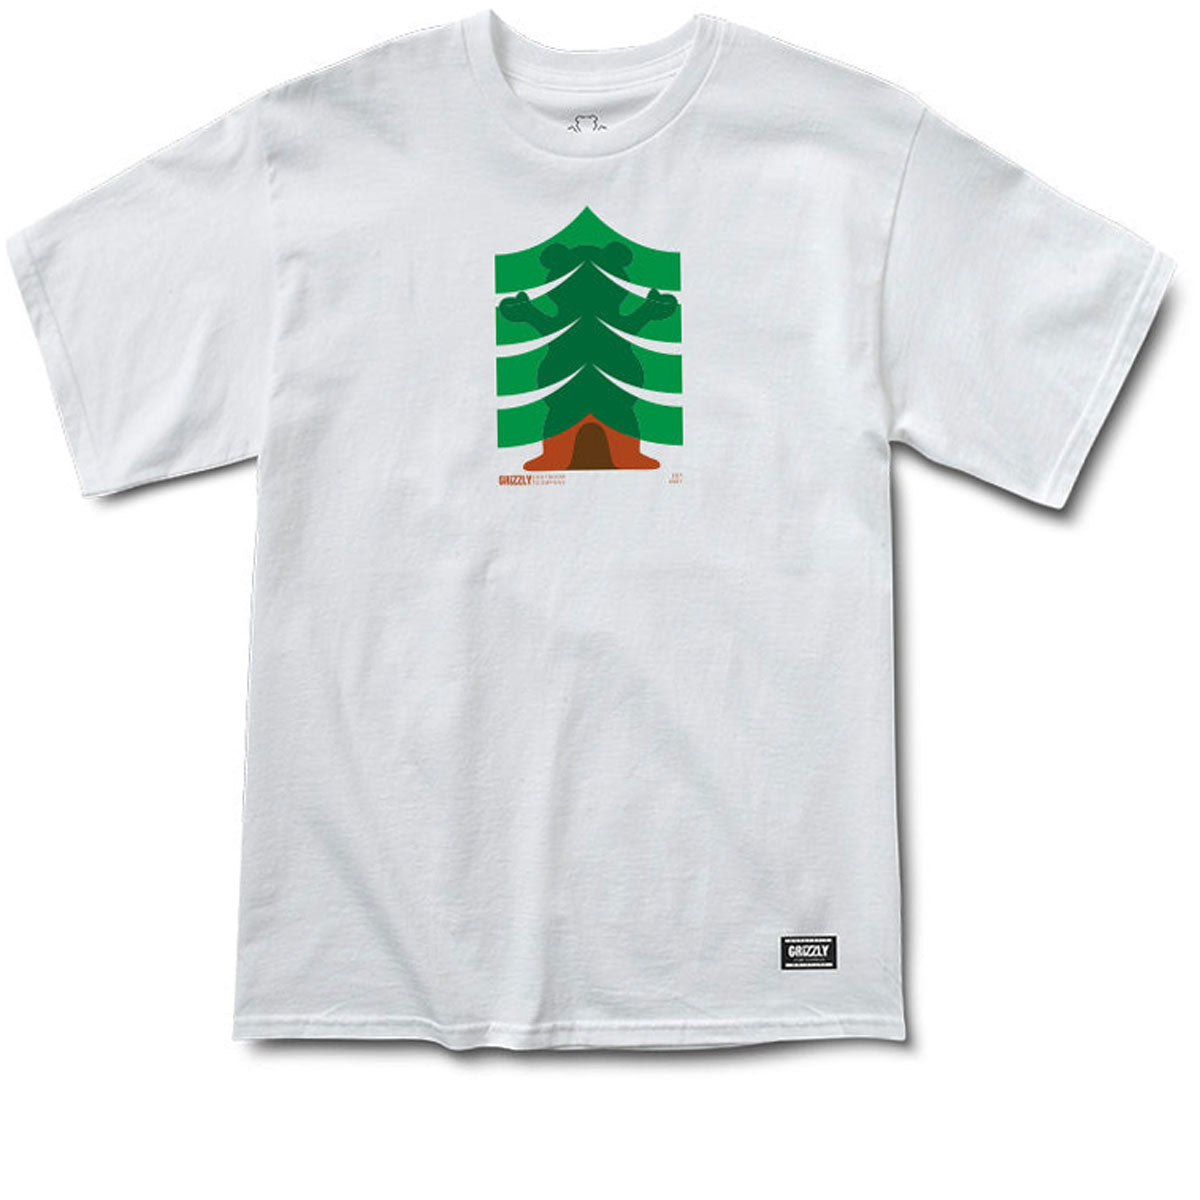 Grizzly Strong Branches T-Shirt - White image 1